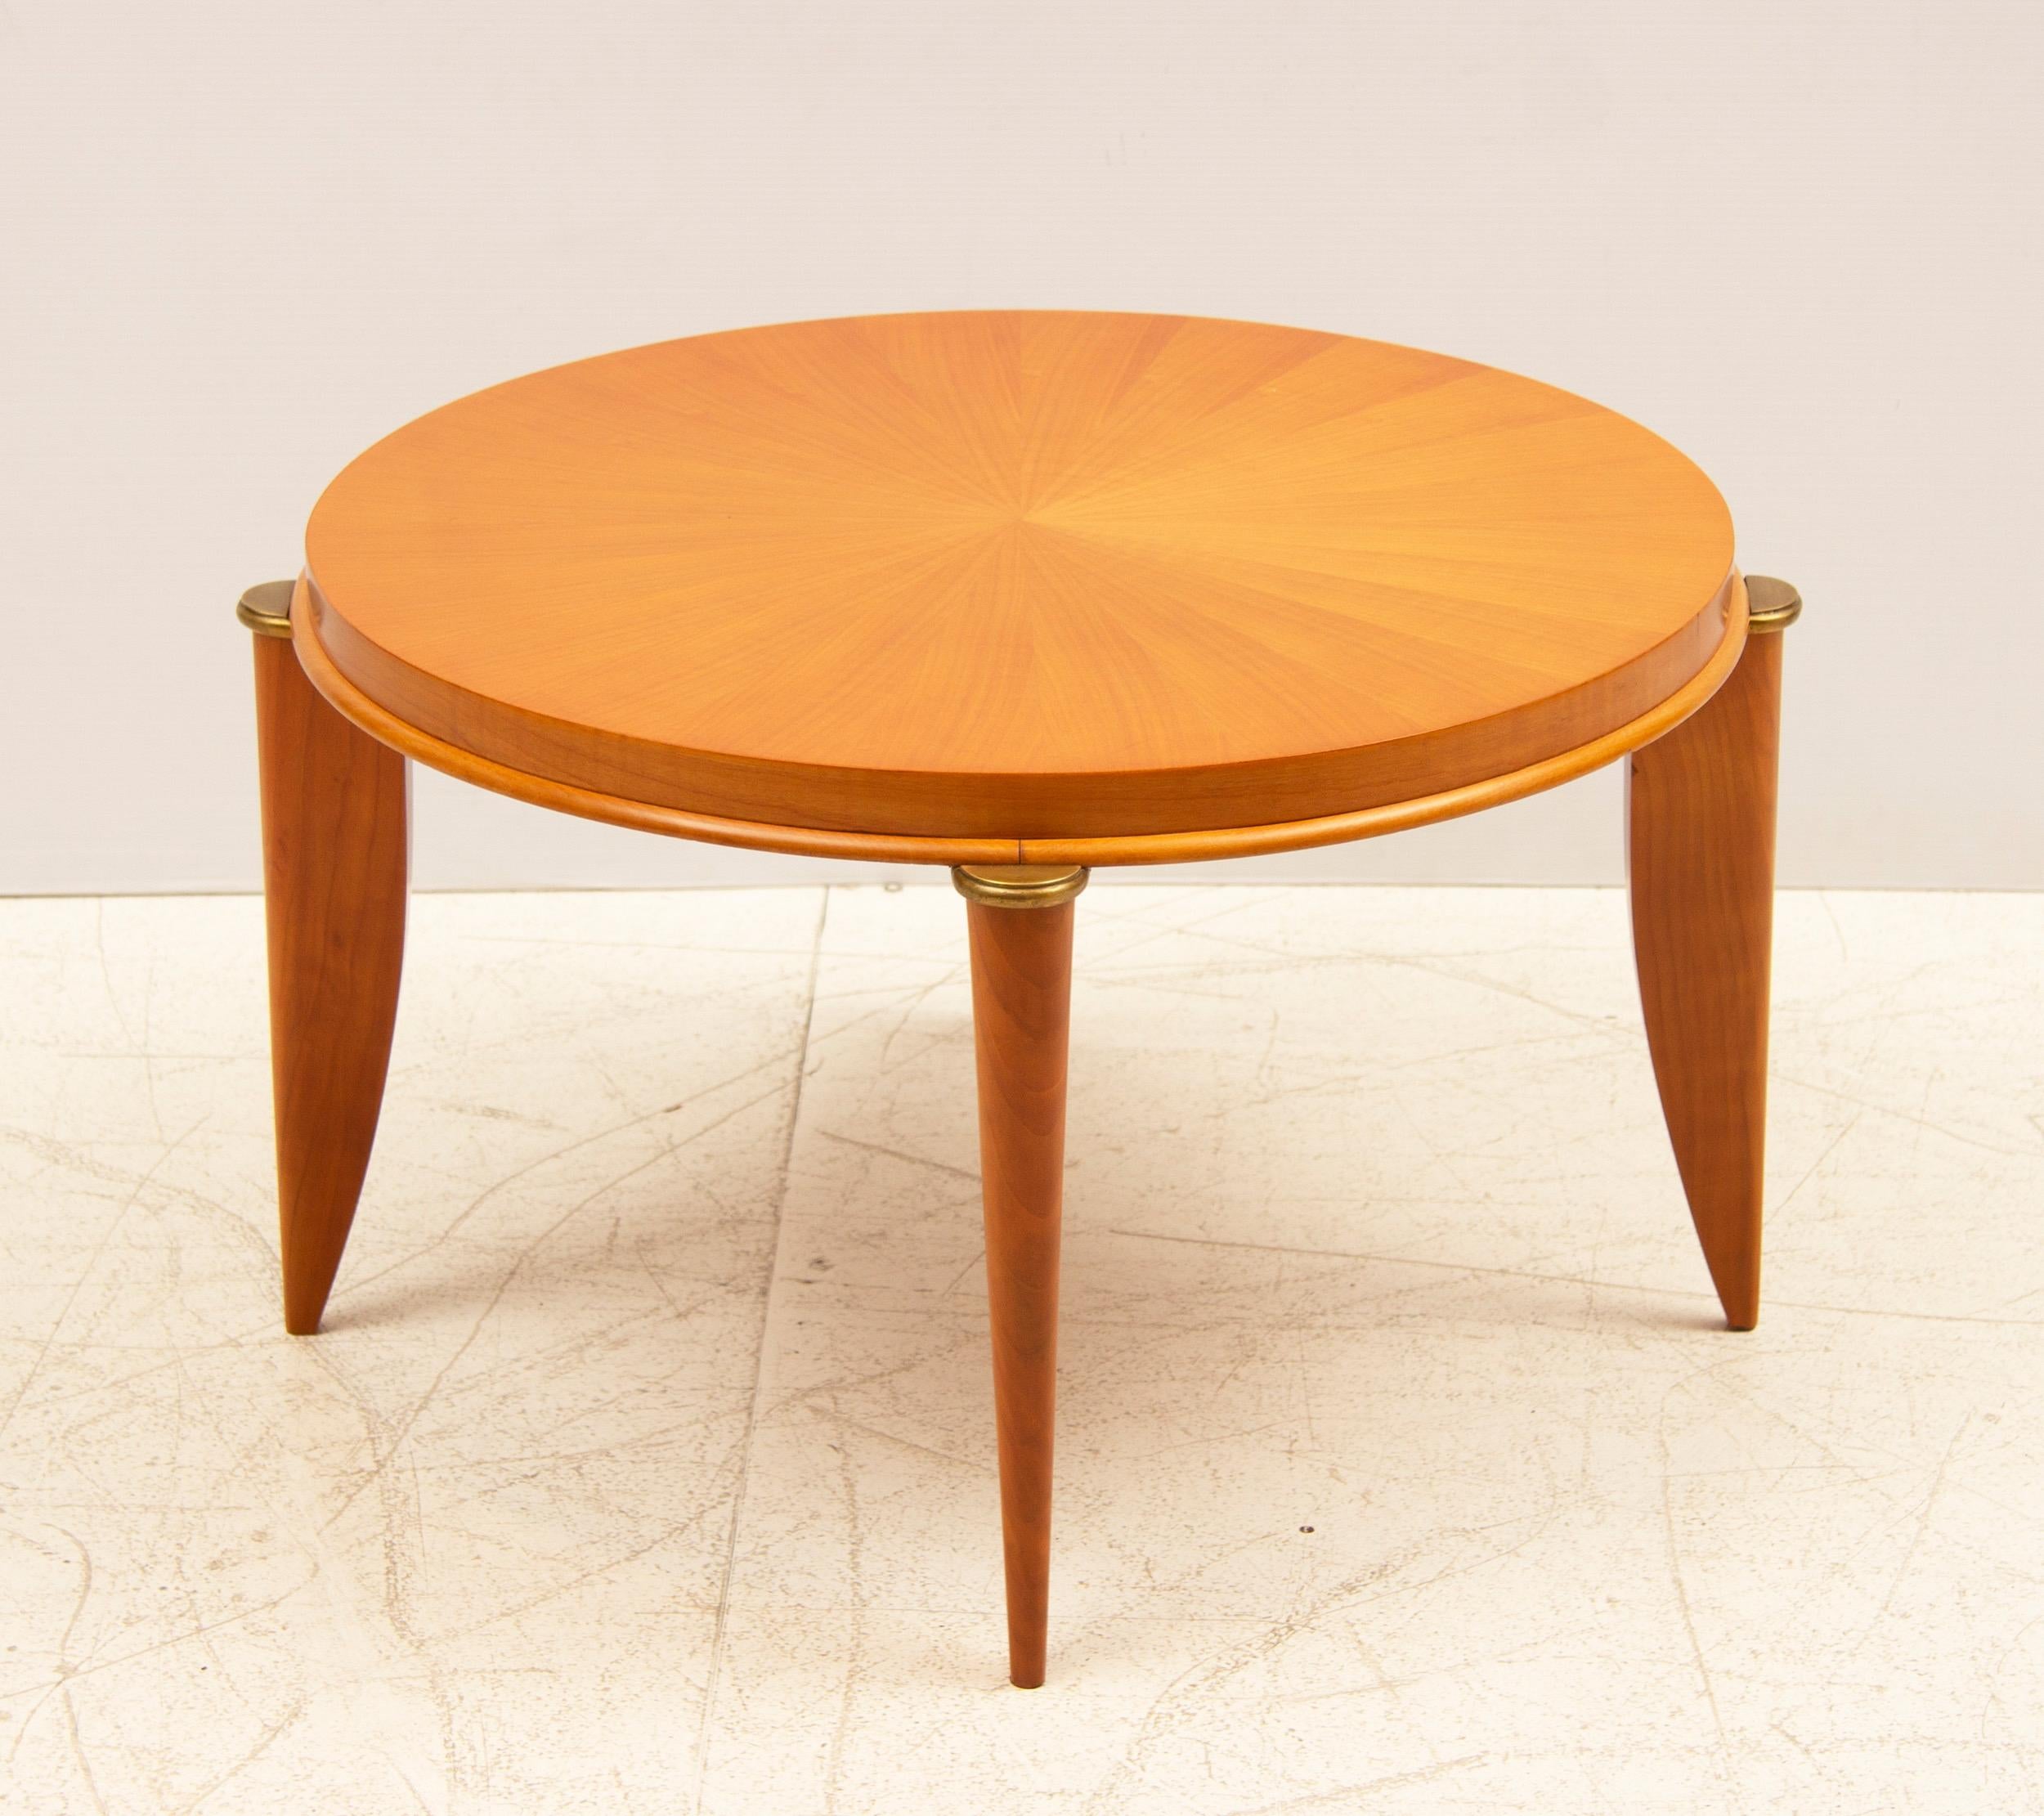 Art Deco coffee or side table.
French Art Deco Sycamore Table by Maurice Jallot.
circular side table with radial veneer and bronze detail raised on sabre shape legs.
Measures: H 41 cm, W 72 cm, D 72 cm
French, circa 1940.